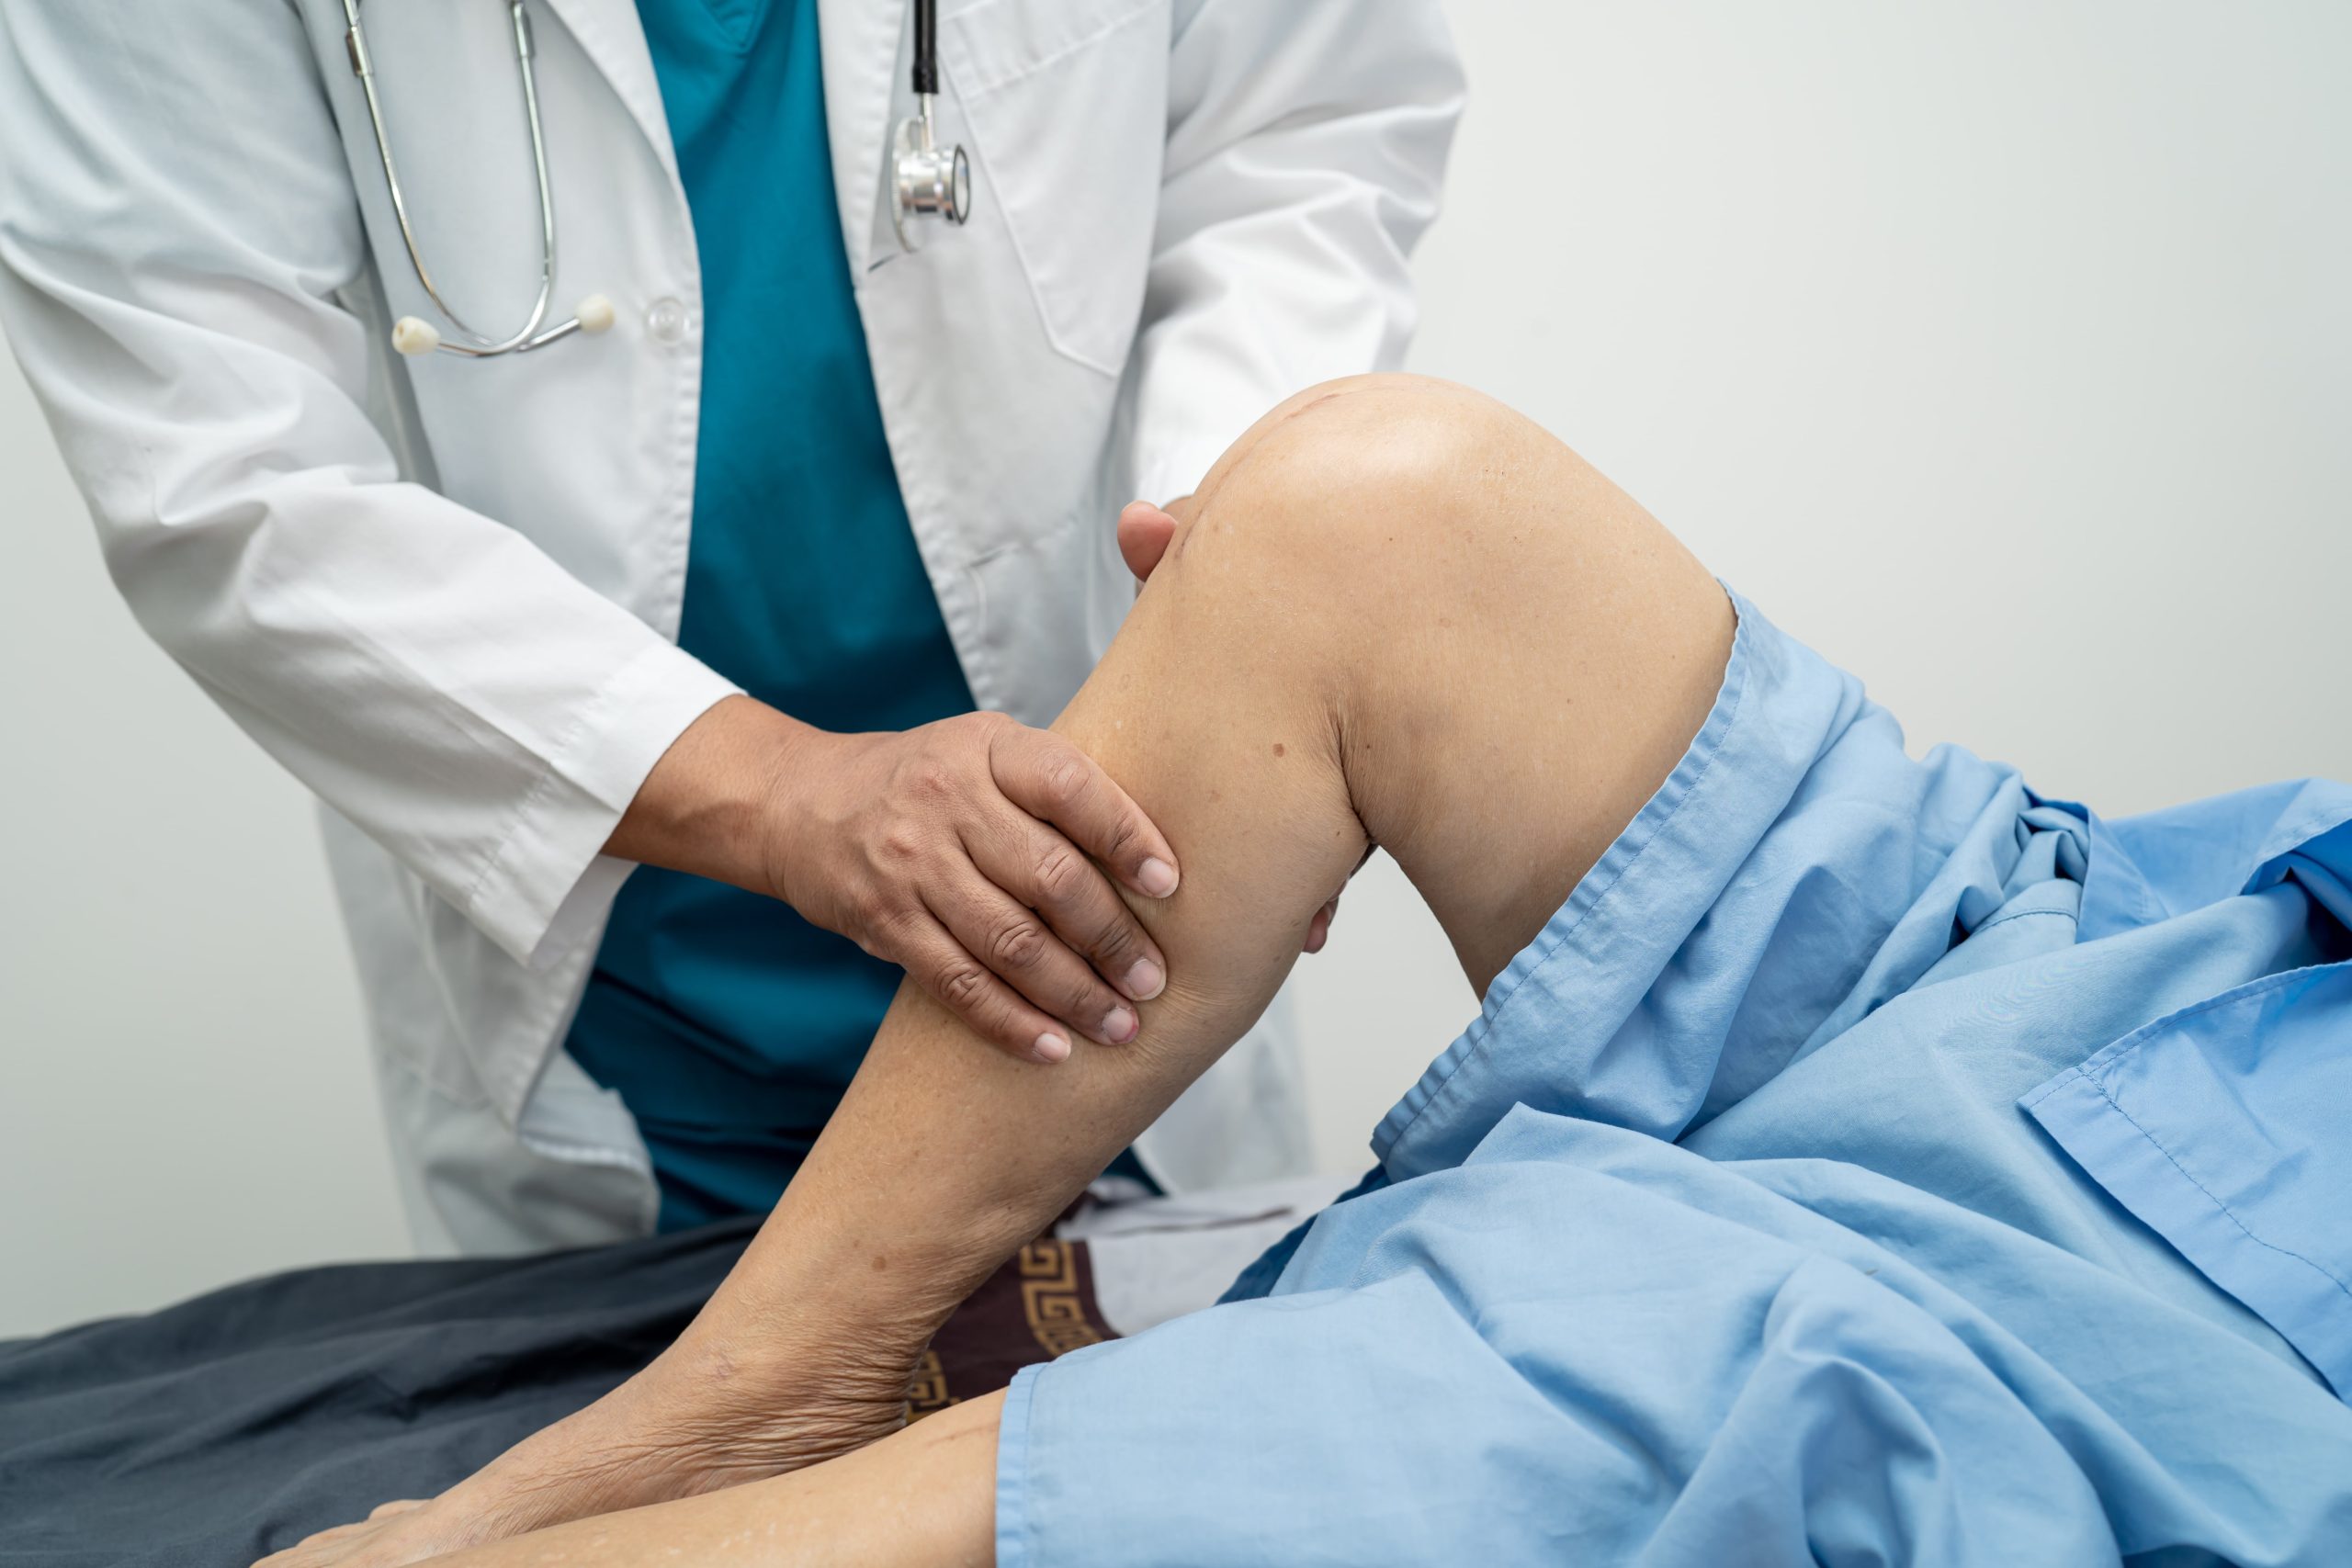 5 Tips for Recovery from Knee Replacement Surgery